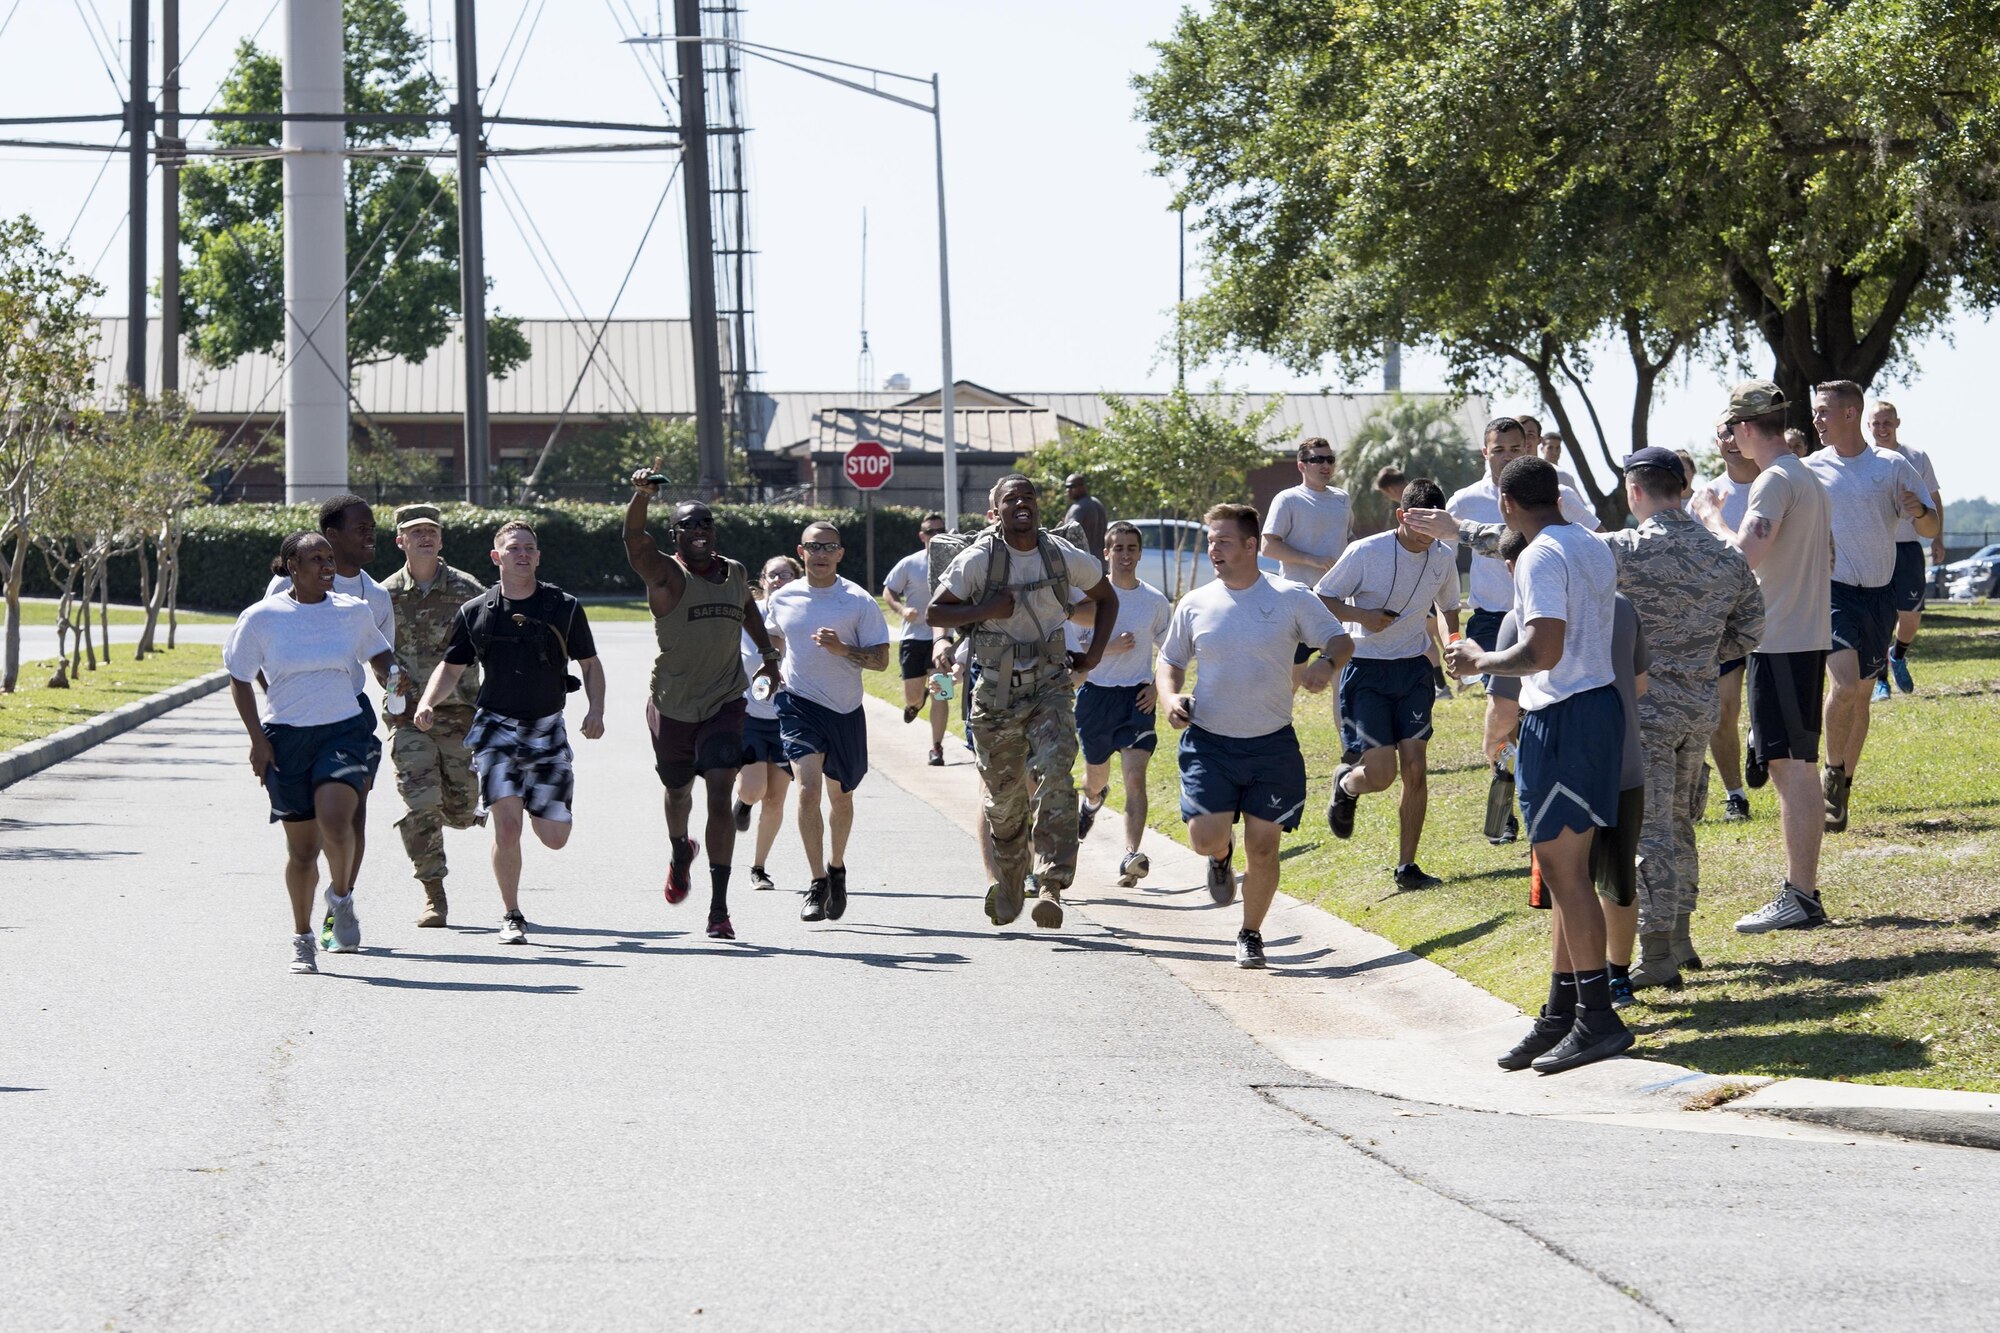 Airman 1st Class David Gardner, 822d Base Defense Squadron fire team member, sprints to the finish line, becoming the first to finish the ruck march portion of the Police Week Quadathalon, May 15, 2017, at Moody Air Force Base, Ga. Teams of four participated in a swim, run, bike and ruck march competition, where the team with the fastest time won bragging rights. Overall, Police Week is designed to honor the legacies fallen officers, both civilian and military, have left behind, but it also gives various sections within the law enforcement community an opportunity to train together in friendly competitions. (U.S. Air Force photo by Senior Airman Janiqua P. Robinson)